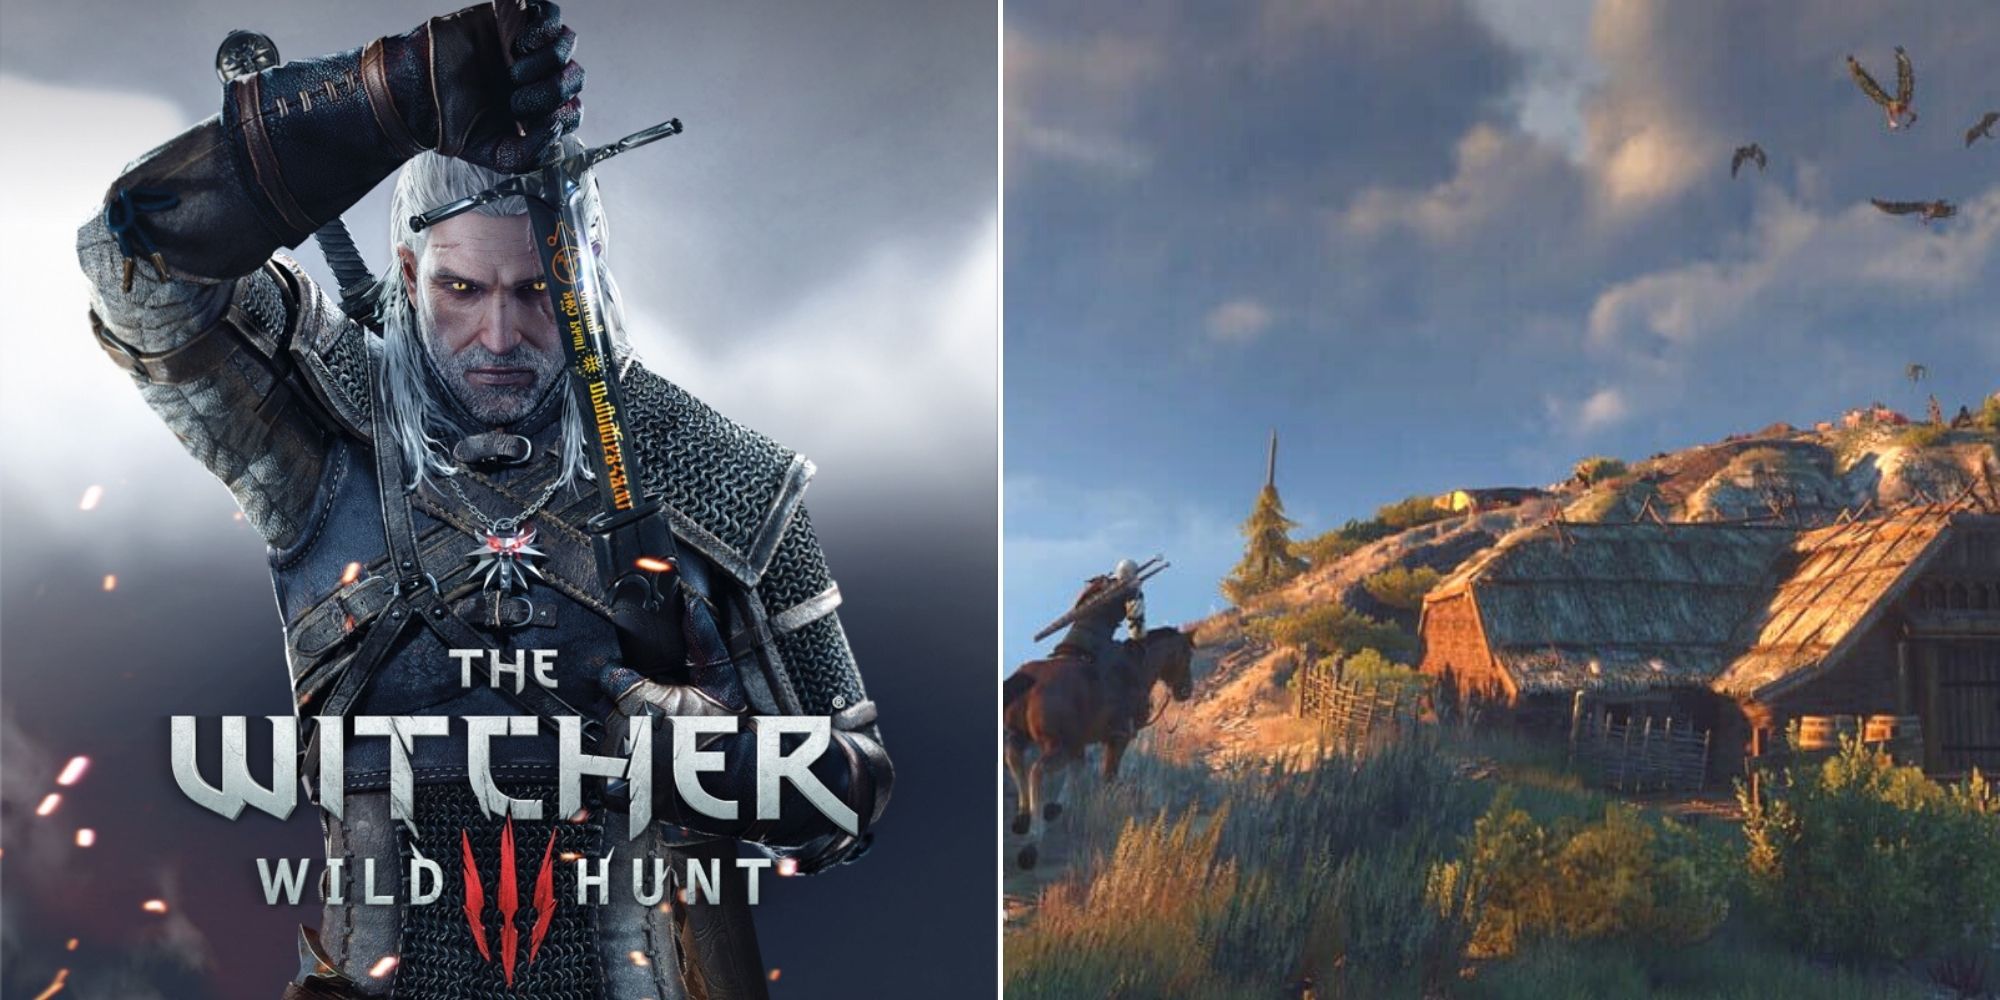 The Witcher 3 Wild Hunt Cover Art and Geralt riding Roach up a hill